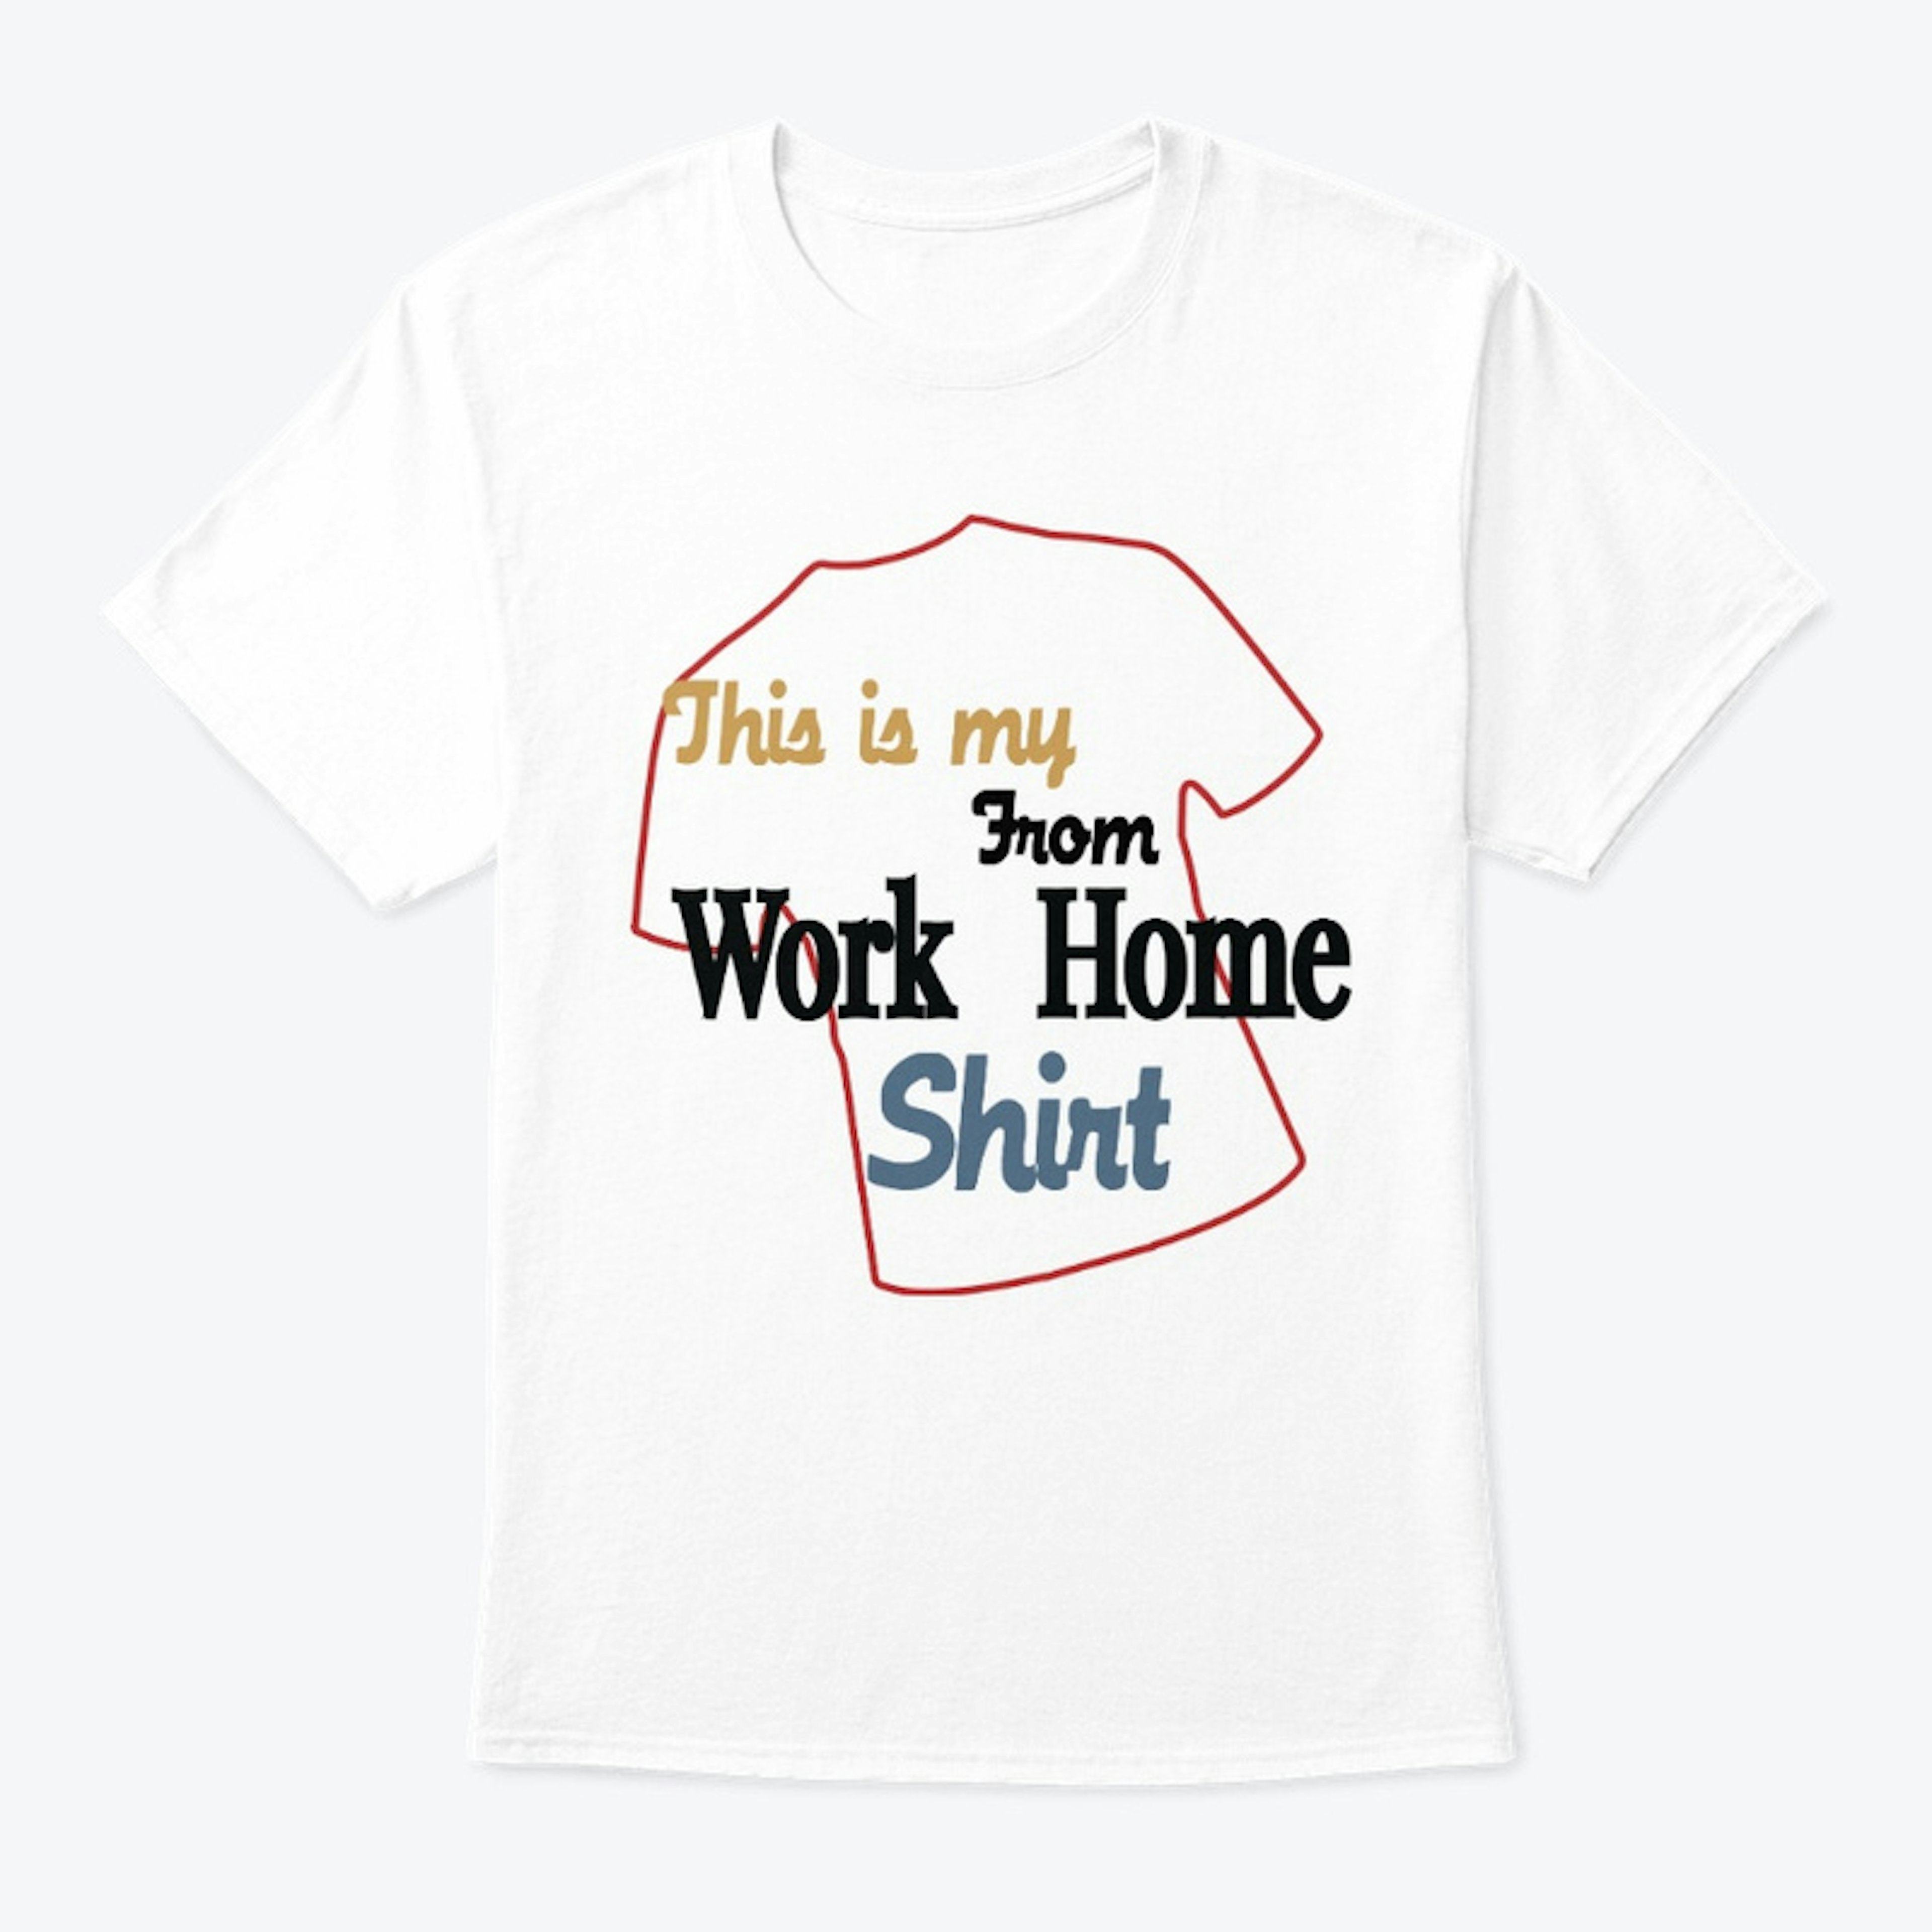 Your Work-From-Home Shirt